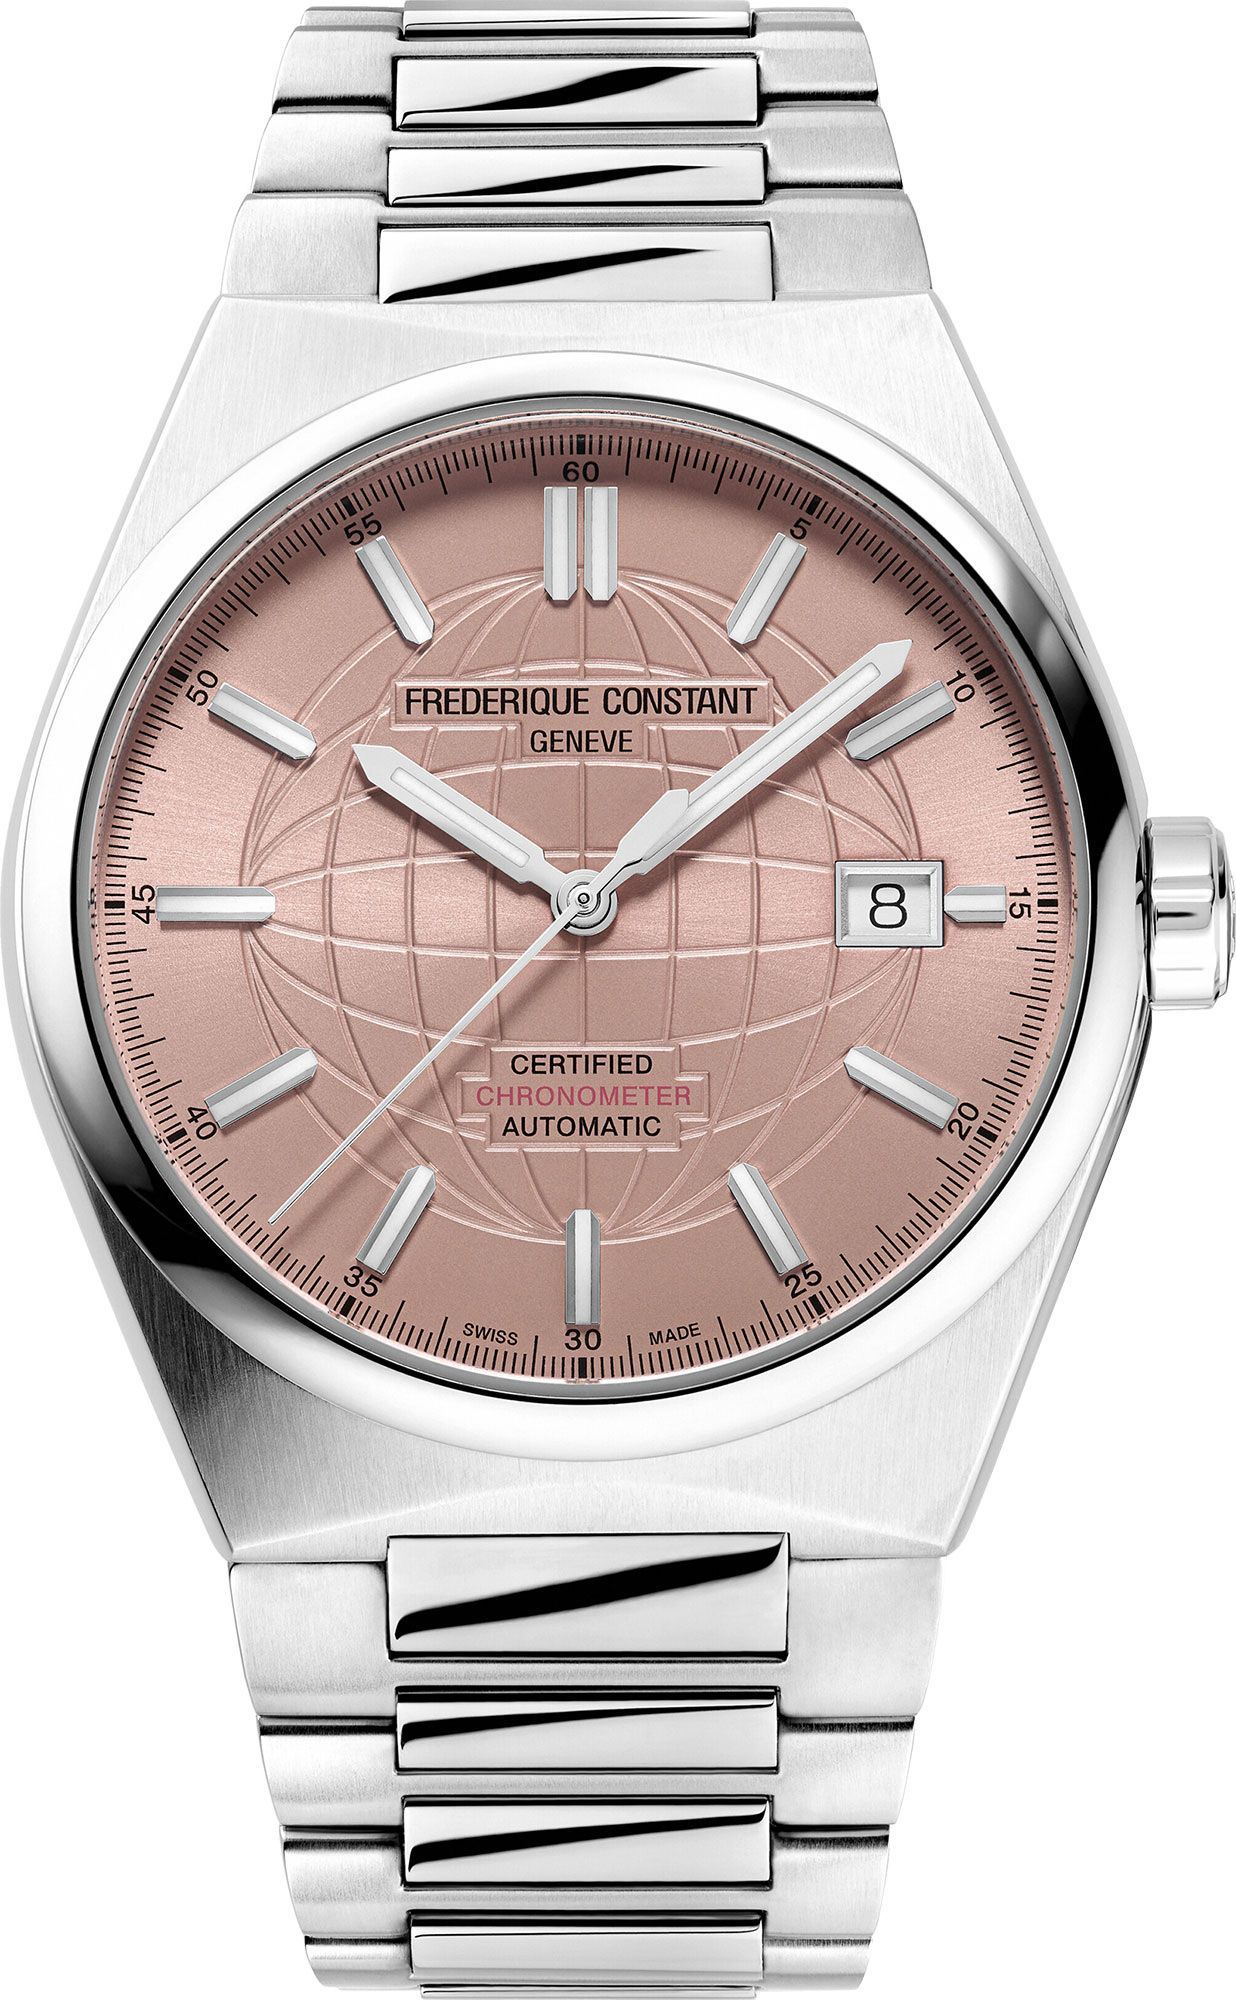 Frederique Constant Highlife Highlife Automatic COSC Salmon Dial 39 mm Automatic Watch For Men - 1